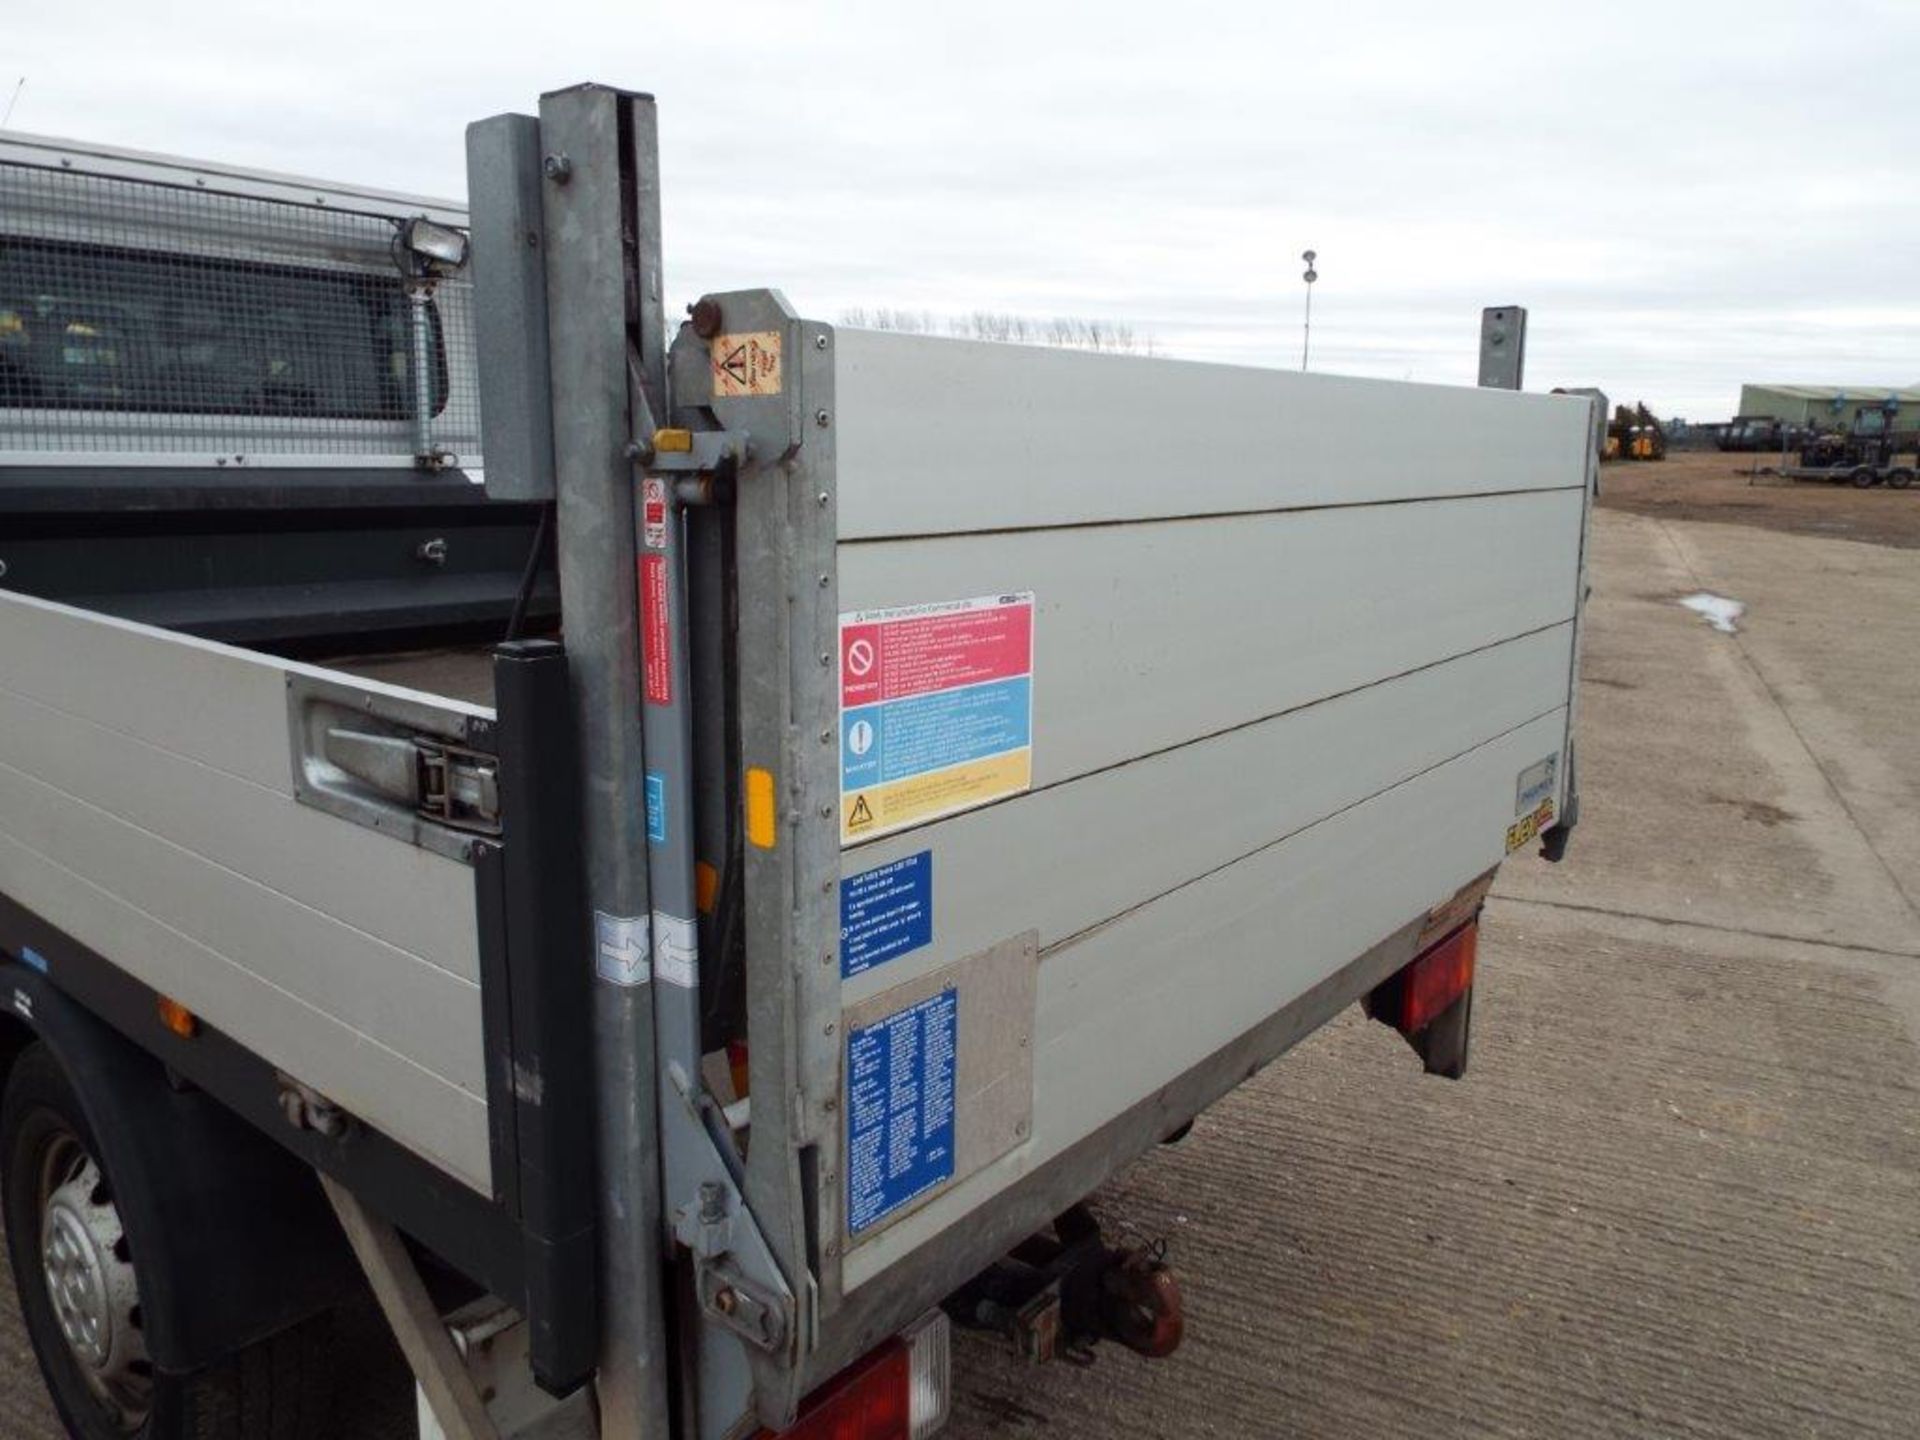 Citroen Relay 7 Seater Double Cab Dropside Pickup with 500kg Ratcliff Palfinger Tail Lift - Image 19 of 29